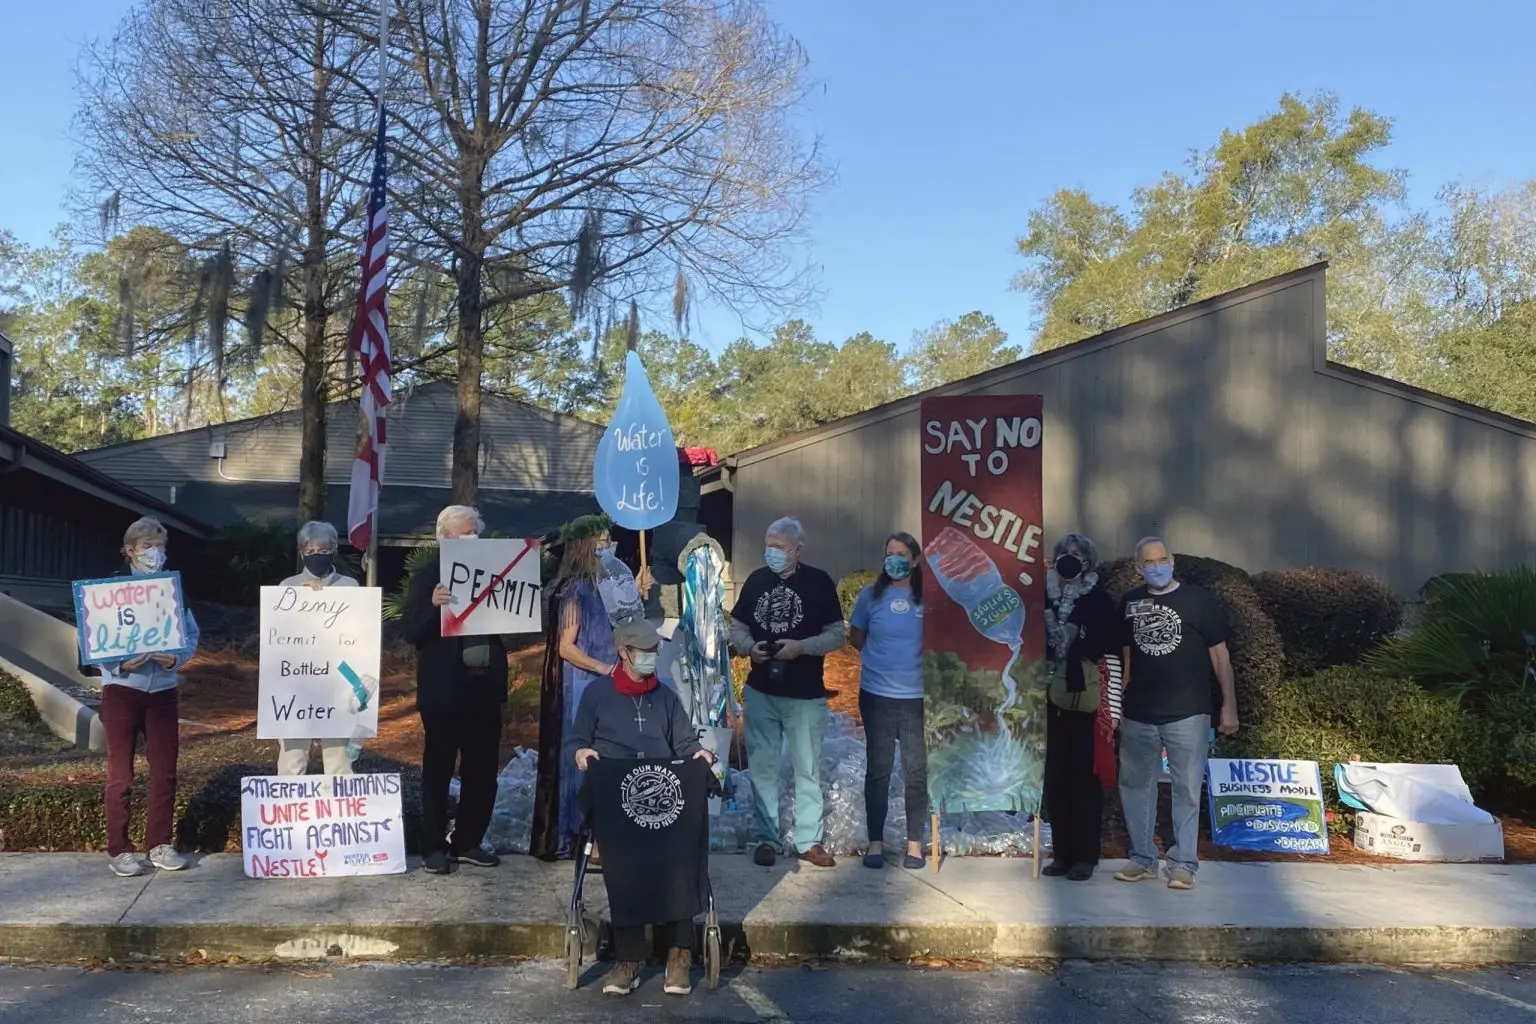 Protesters stand on a sidewalk outside of a wooden building. Their signs read: "water is life" , "deny permit for bottled water" and "say no to nestle"